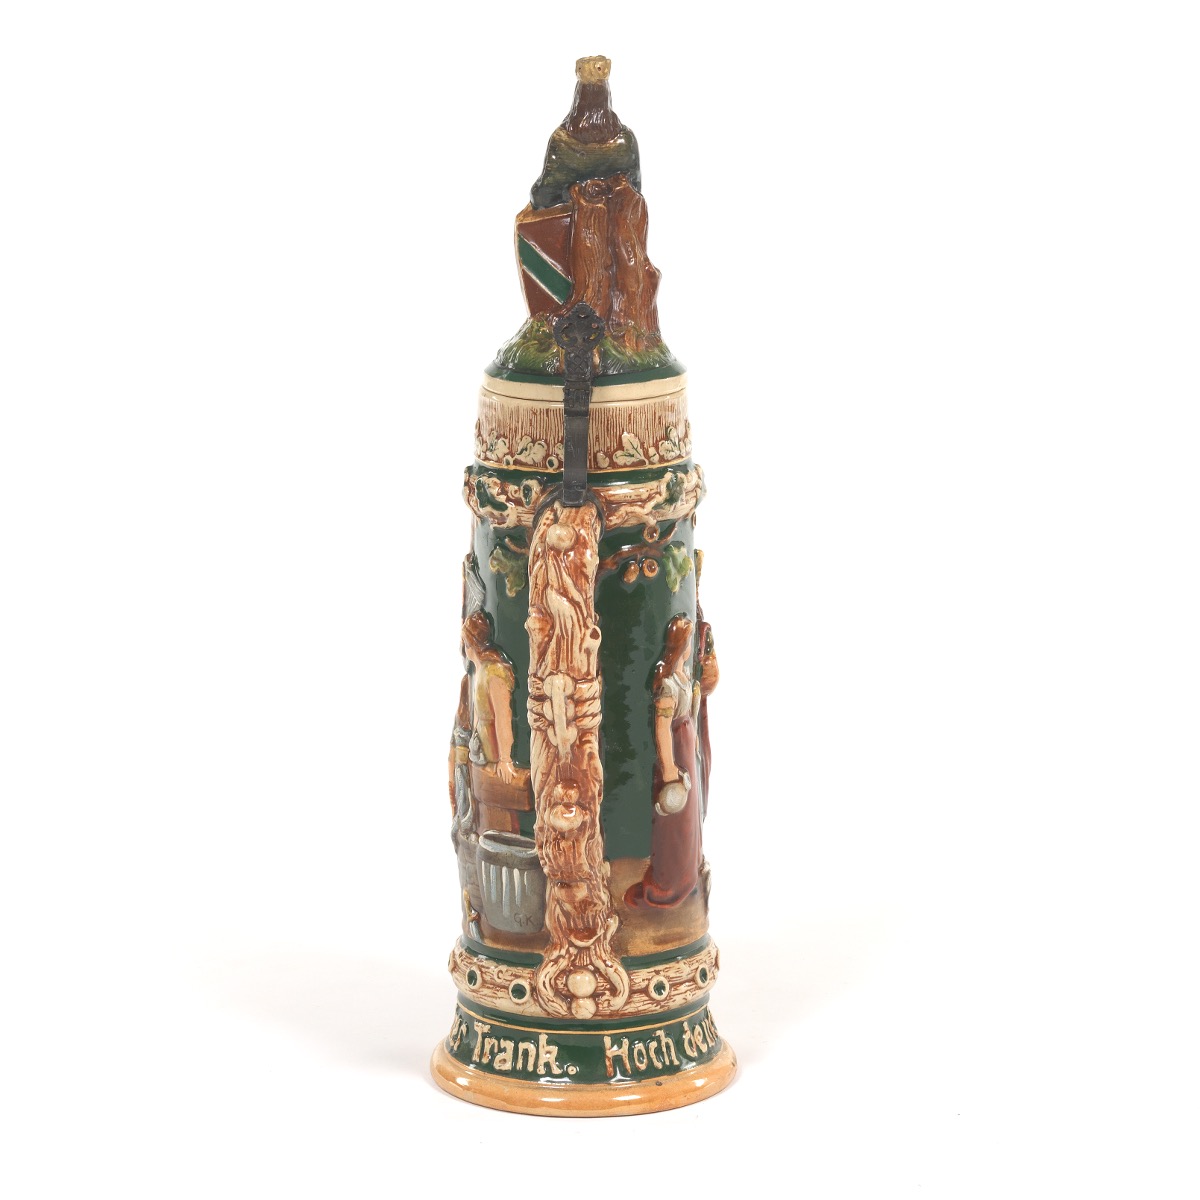 German Ceramic Stein "The Ring of the Nibelung" - Image 4 of 10